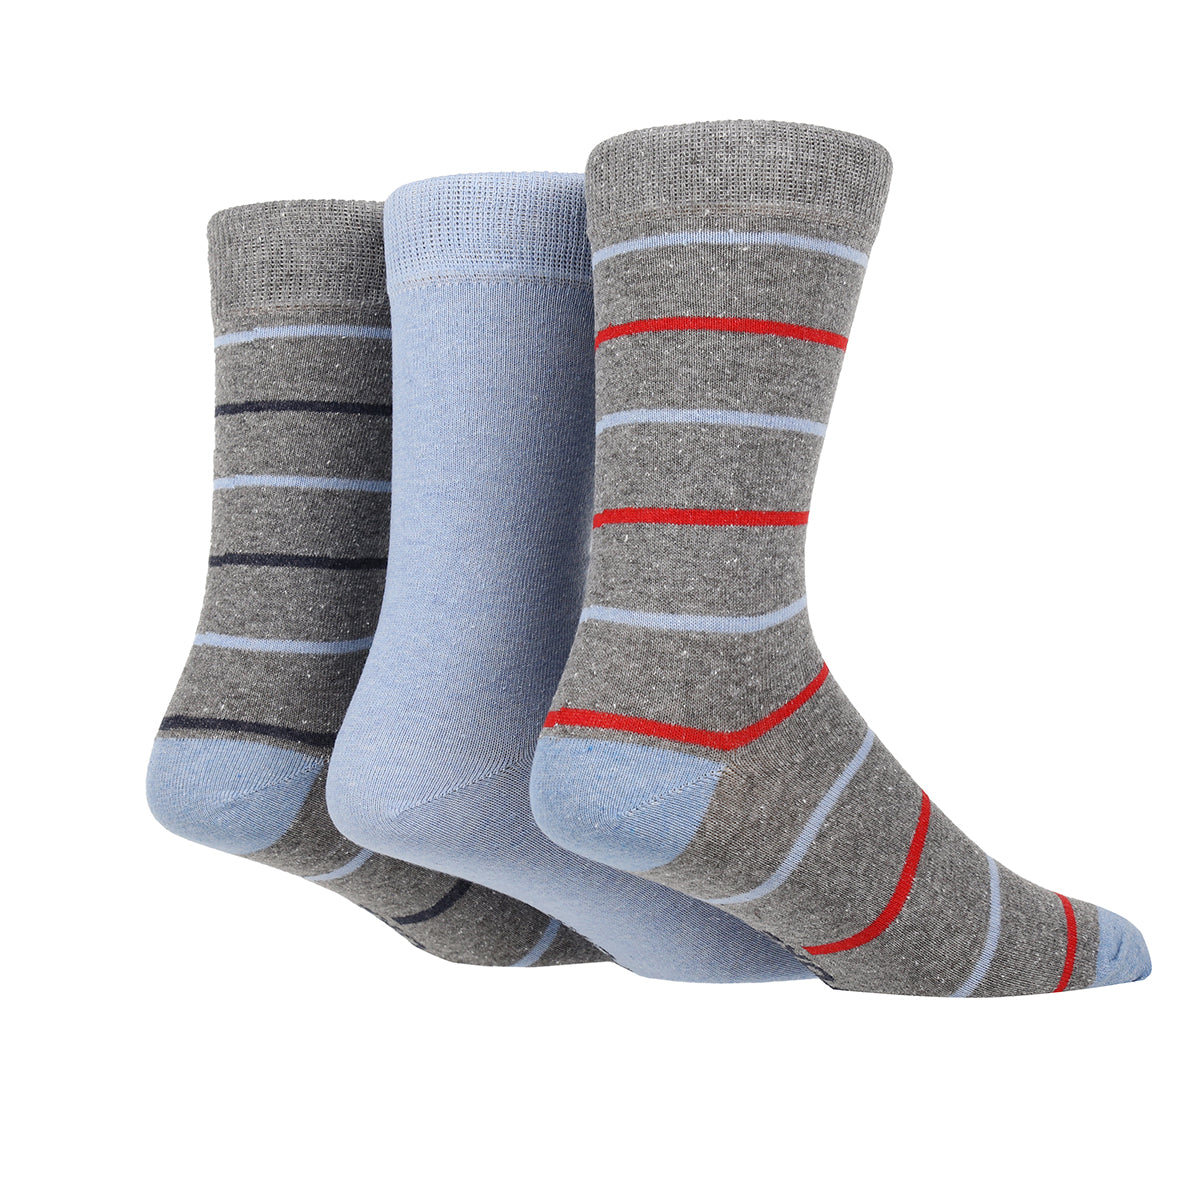 Men's Socks with Stripes - 3 Pairs